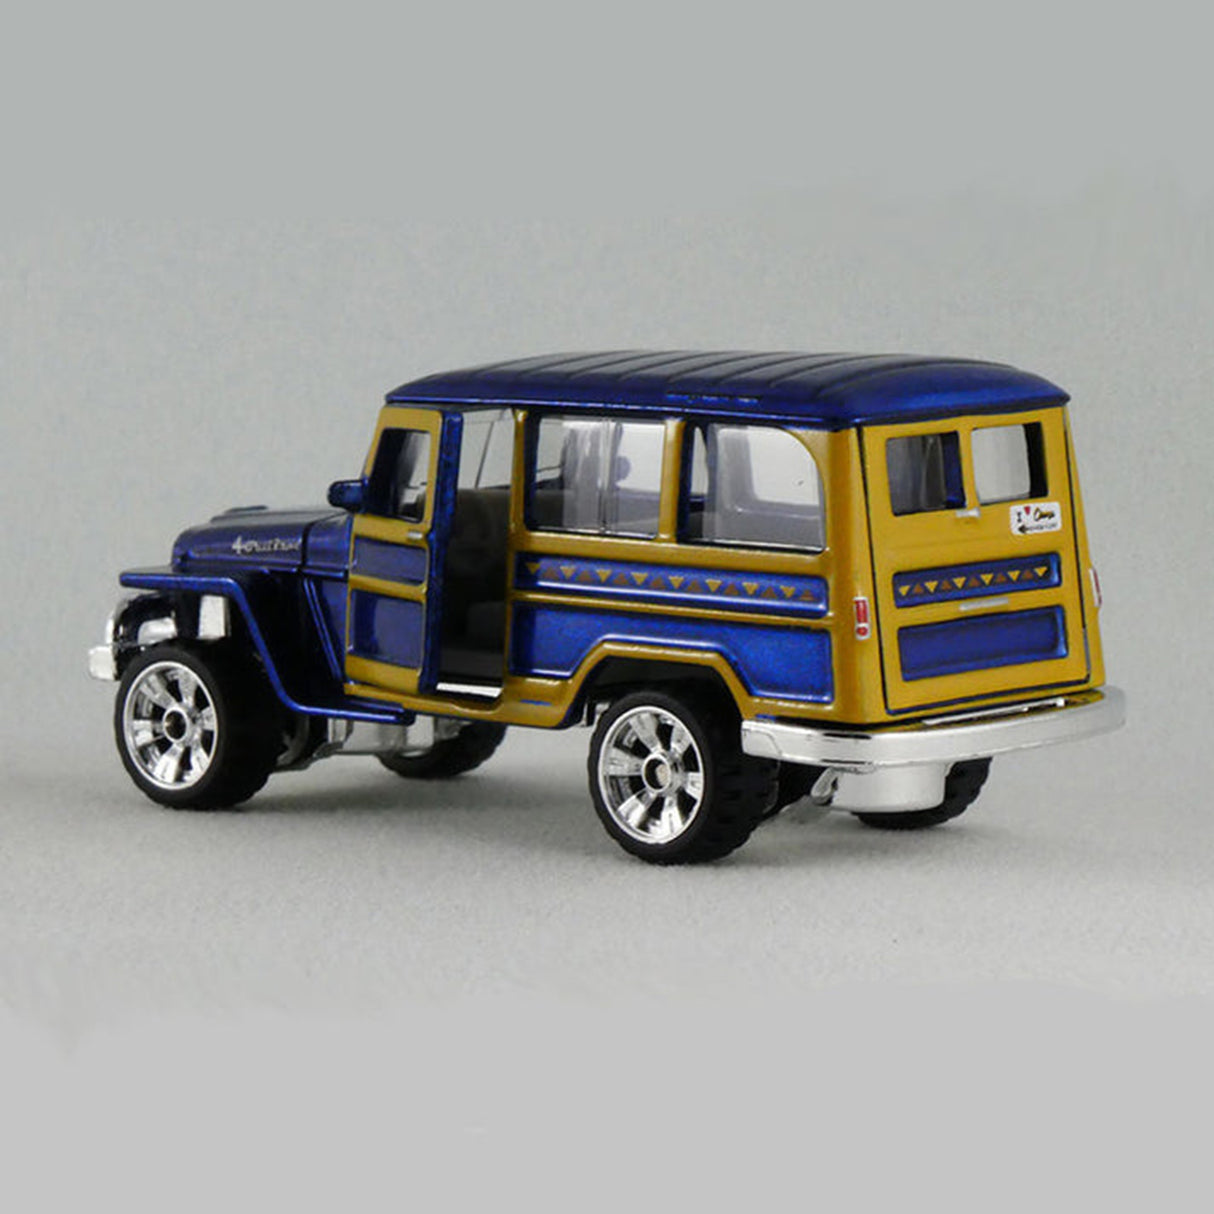 Matchbox 1:64 Scale 1962 Willys Jeep Wagon Die-cast Model